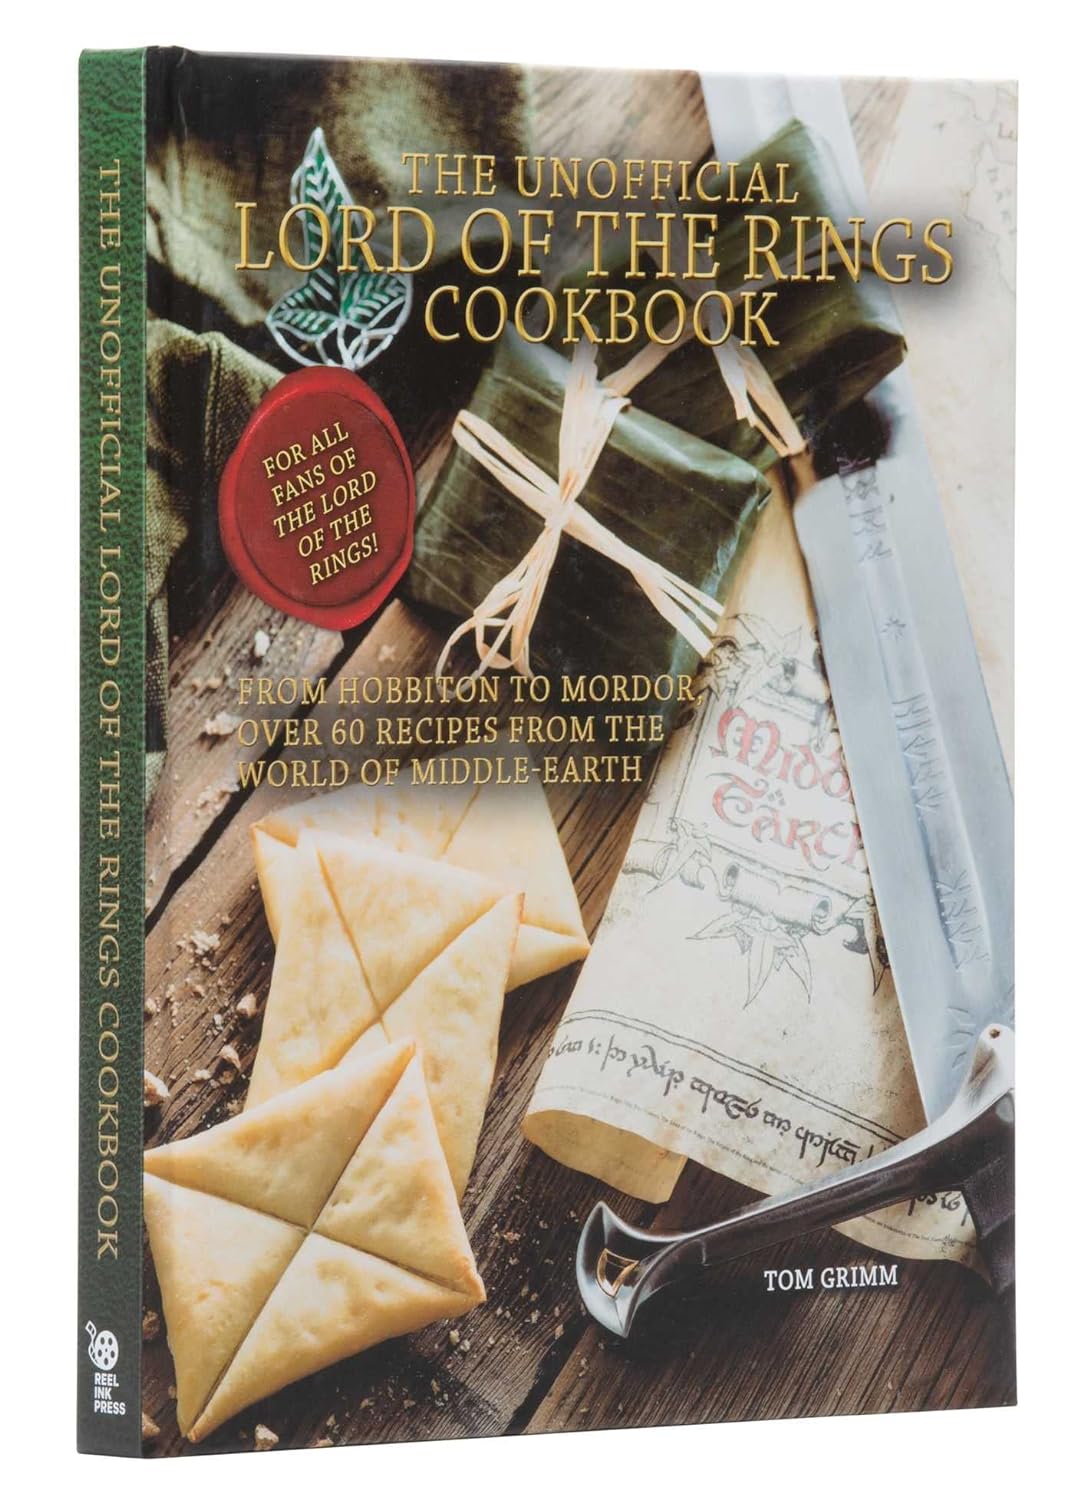 A copy of "The Unofficial Lord of the Rings Cookbook". The cover also reads "For all fans of Lord of the Rings" and "From Hobbiton to Mordor: Over 60 Recipes From the World of Middle-Earth - by Tom Grimm". 